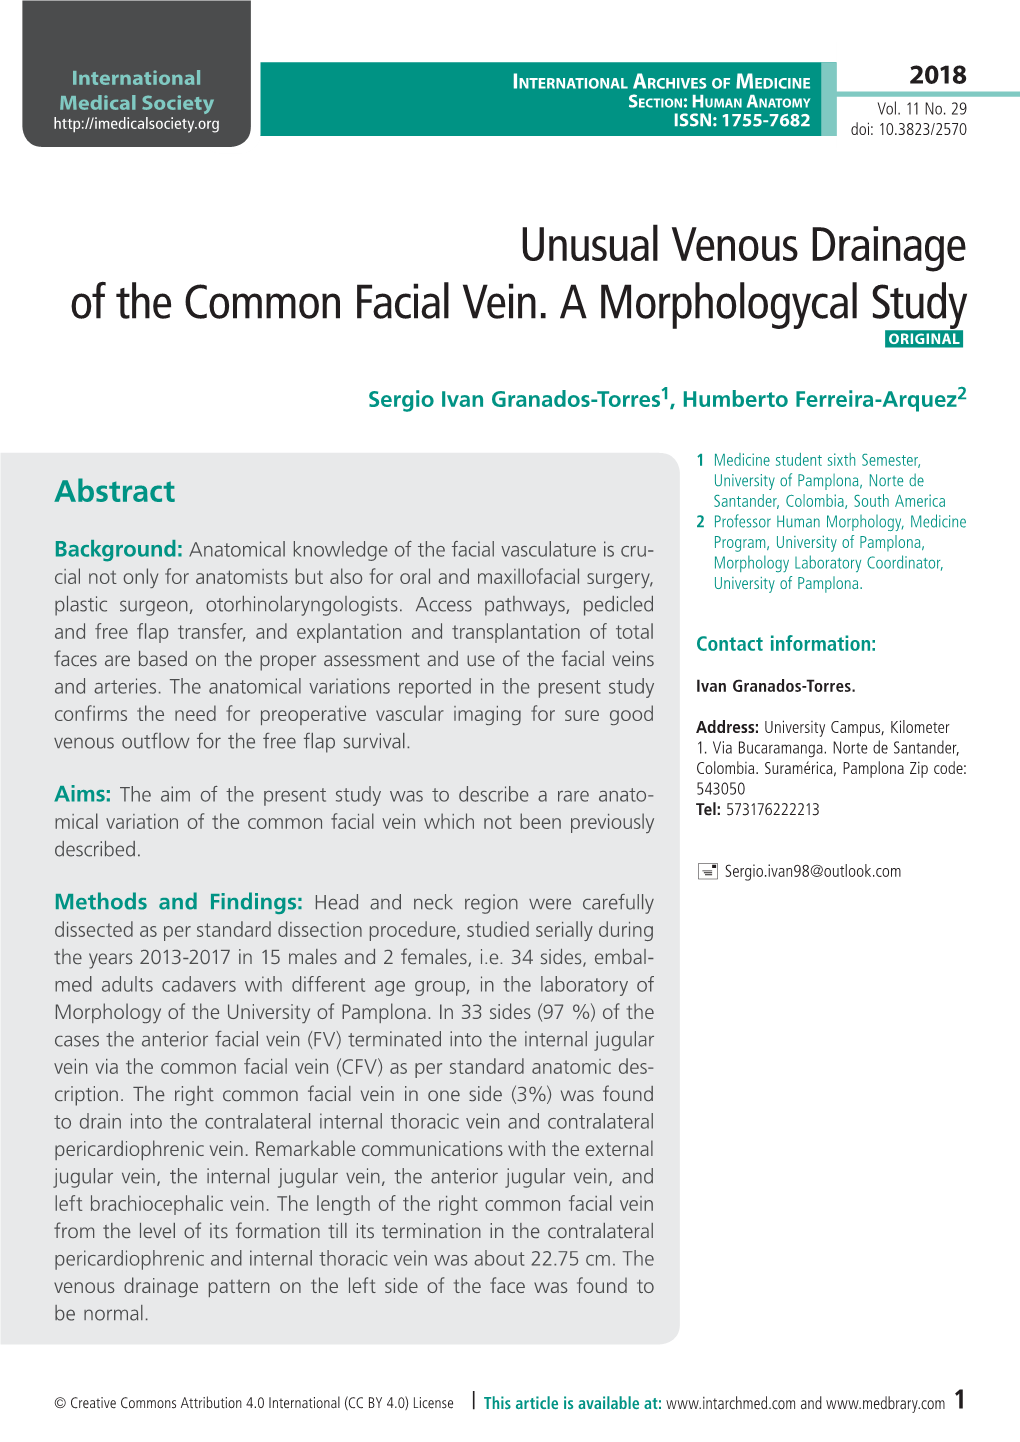 Unusual Venous Drainage of the Common Facial Vein. a Morphologycal Study ORIGINAL